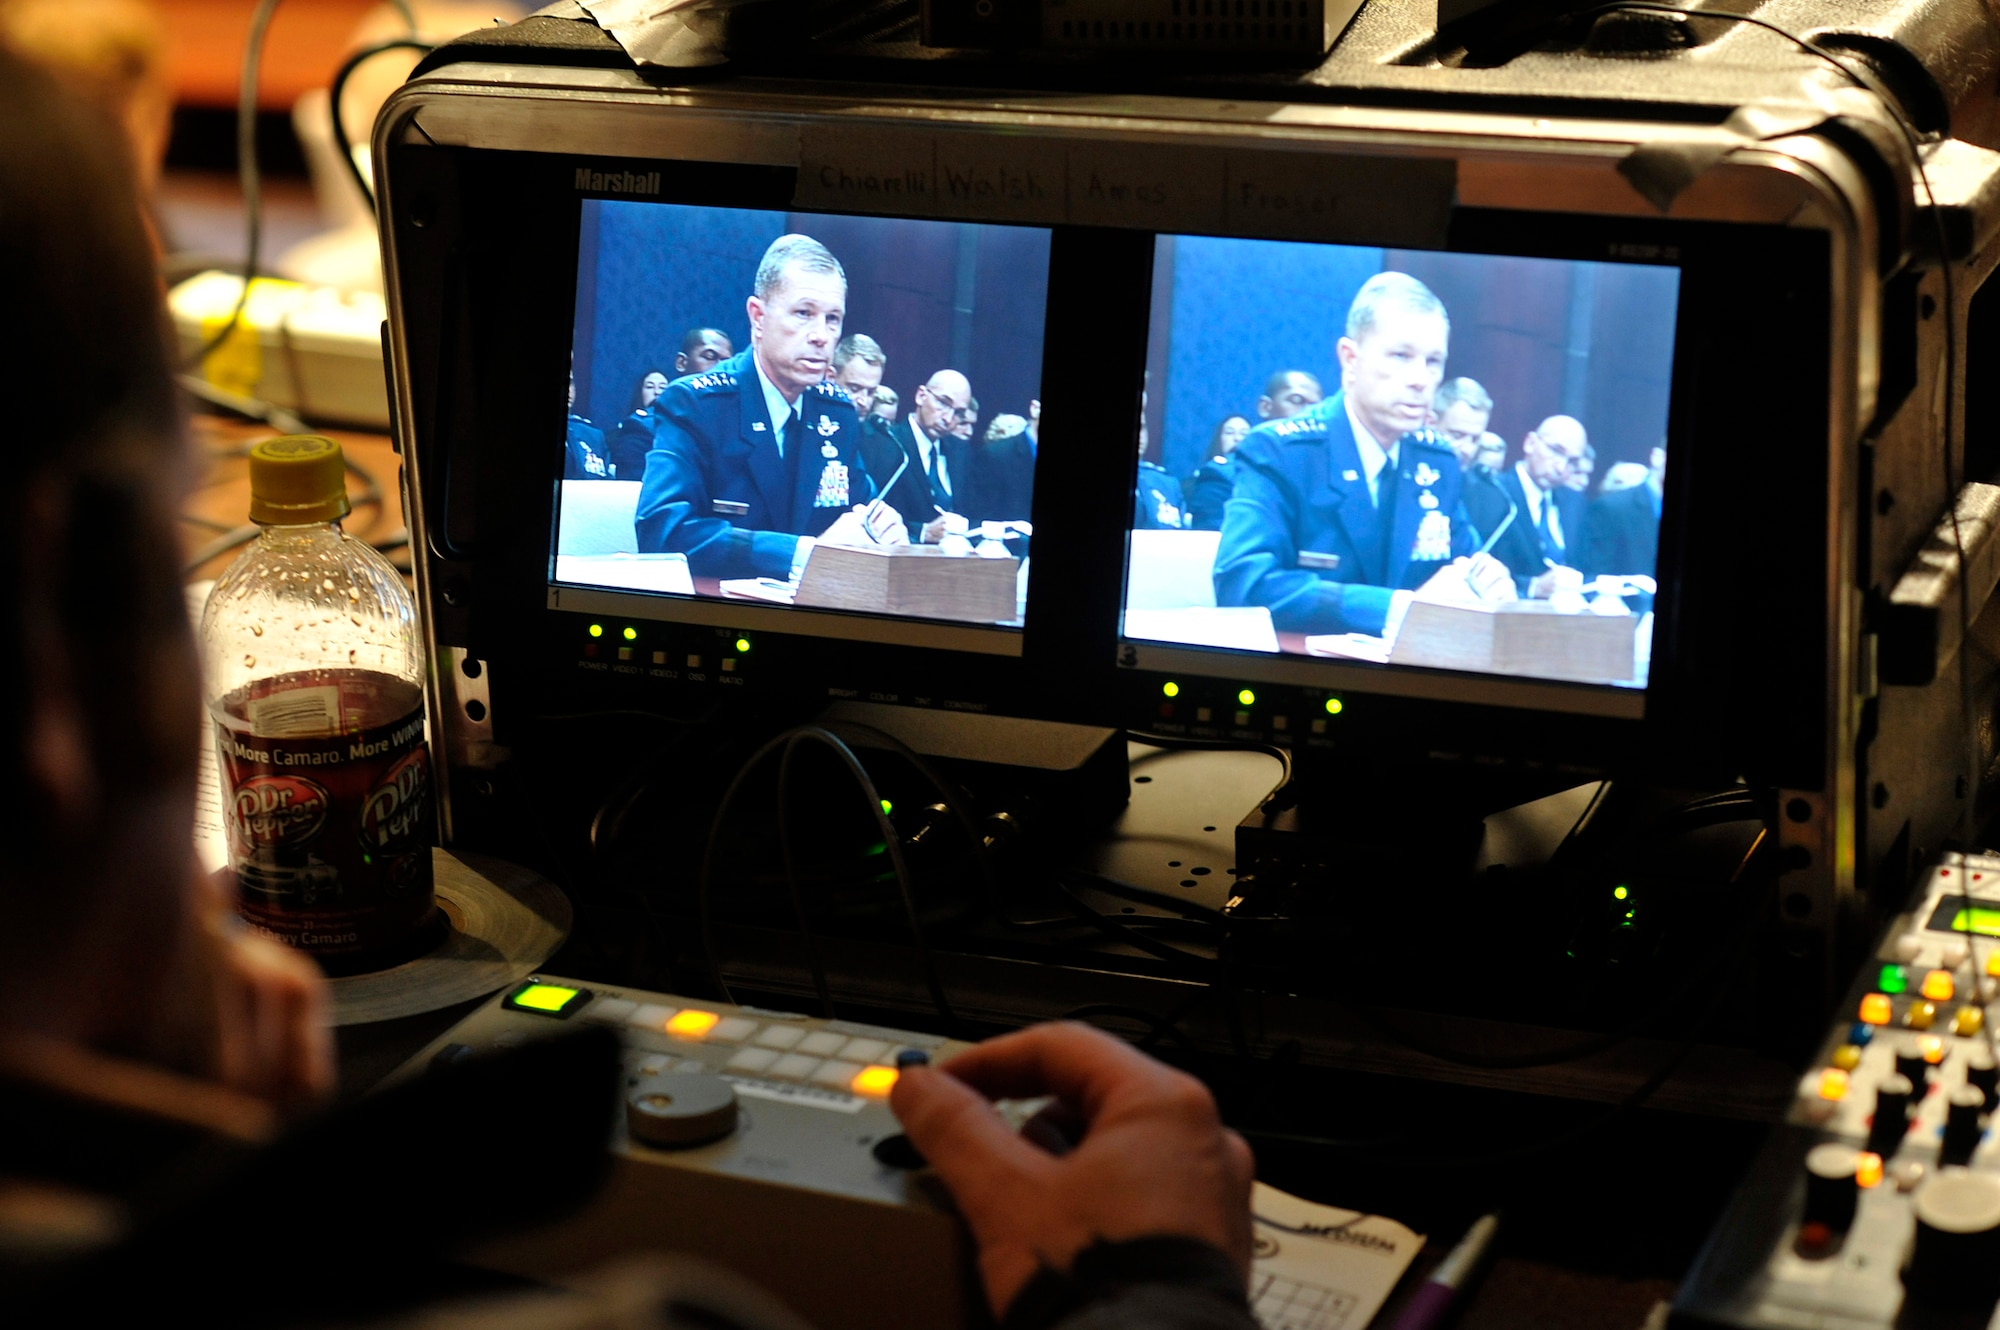 Air Force Vice Chief of Staff Gen. William Fraser, on screens, testifies before the House Armed Services Committee July 29 on suicide prevention within the military.  Each services' vice chief appeared at the U.S. Capitol on behalf of his service-specific programs.  (U.S. Air Force photo/Scott M. Ash)